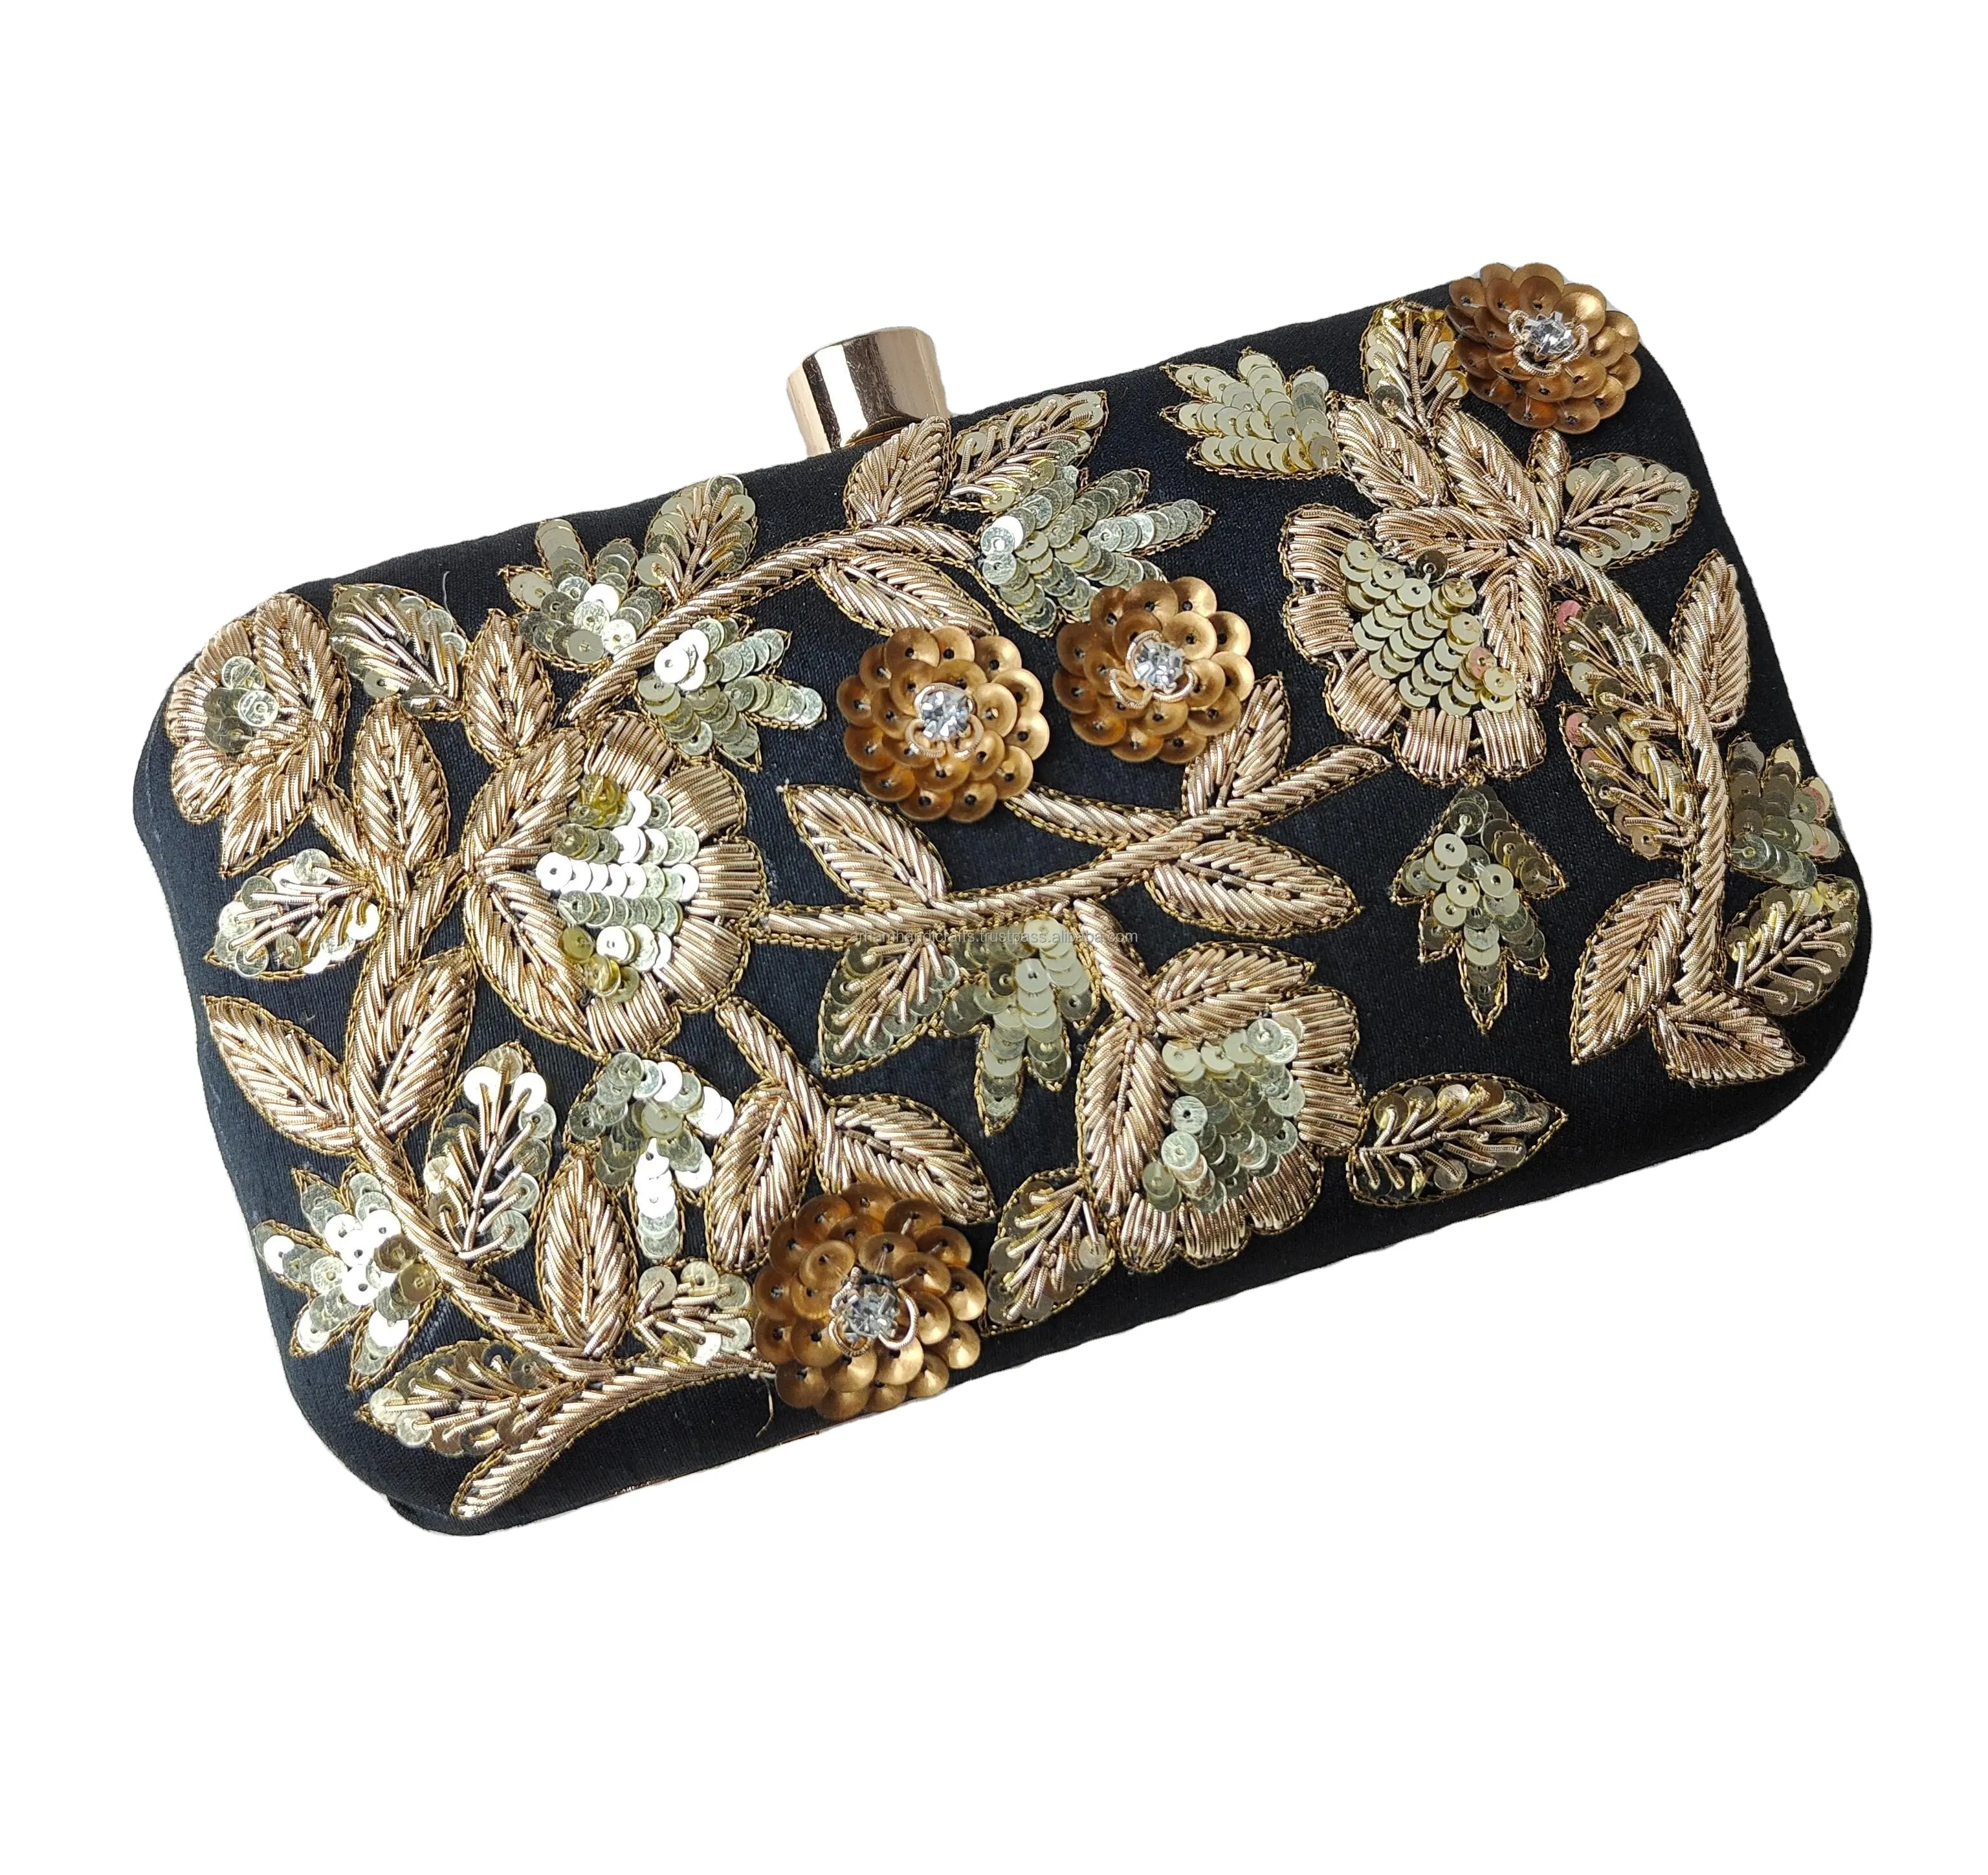 Luxurious embroidered wallets Handmade evening purses Exquisite clutches Ornamental hand bag for women BY LUXURY CRATS